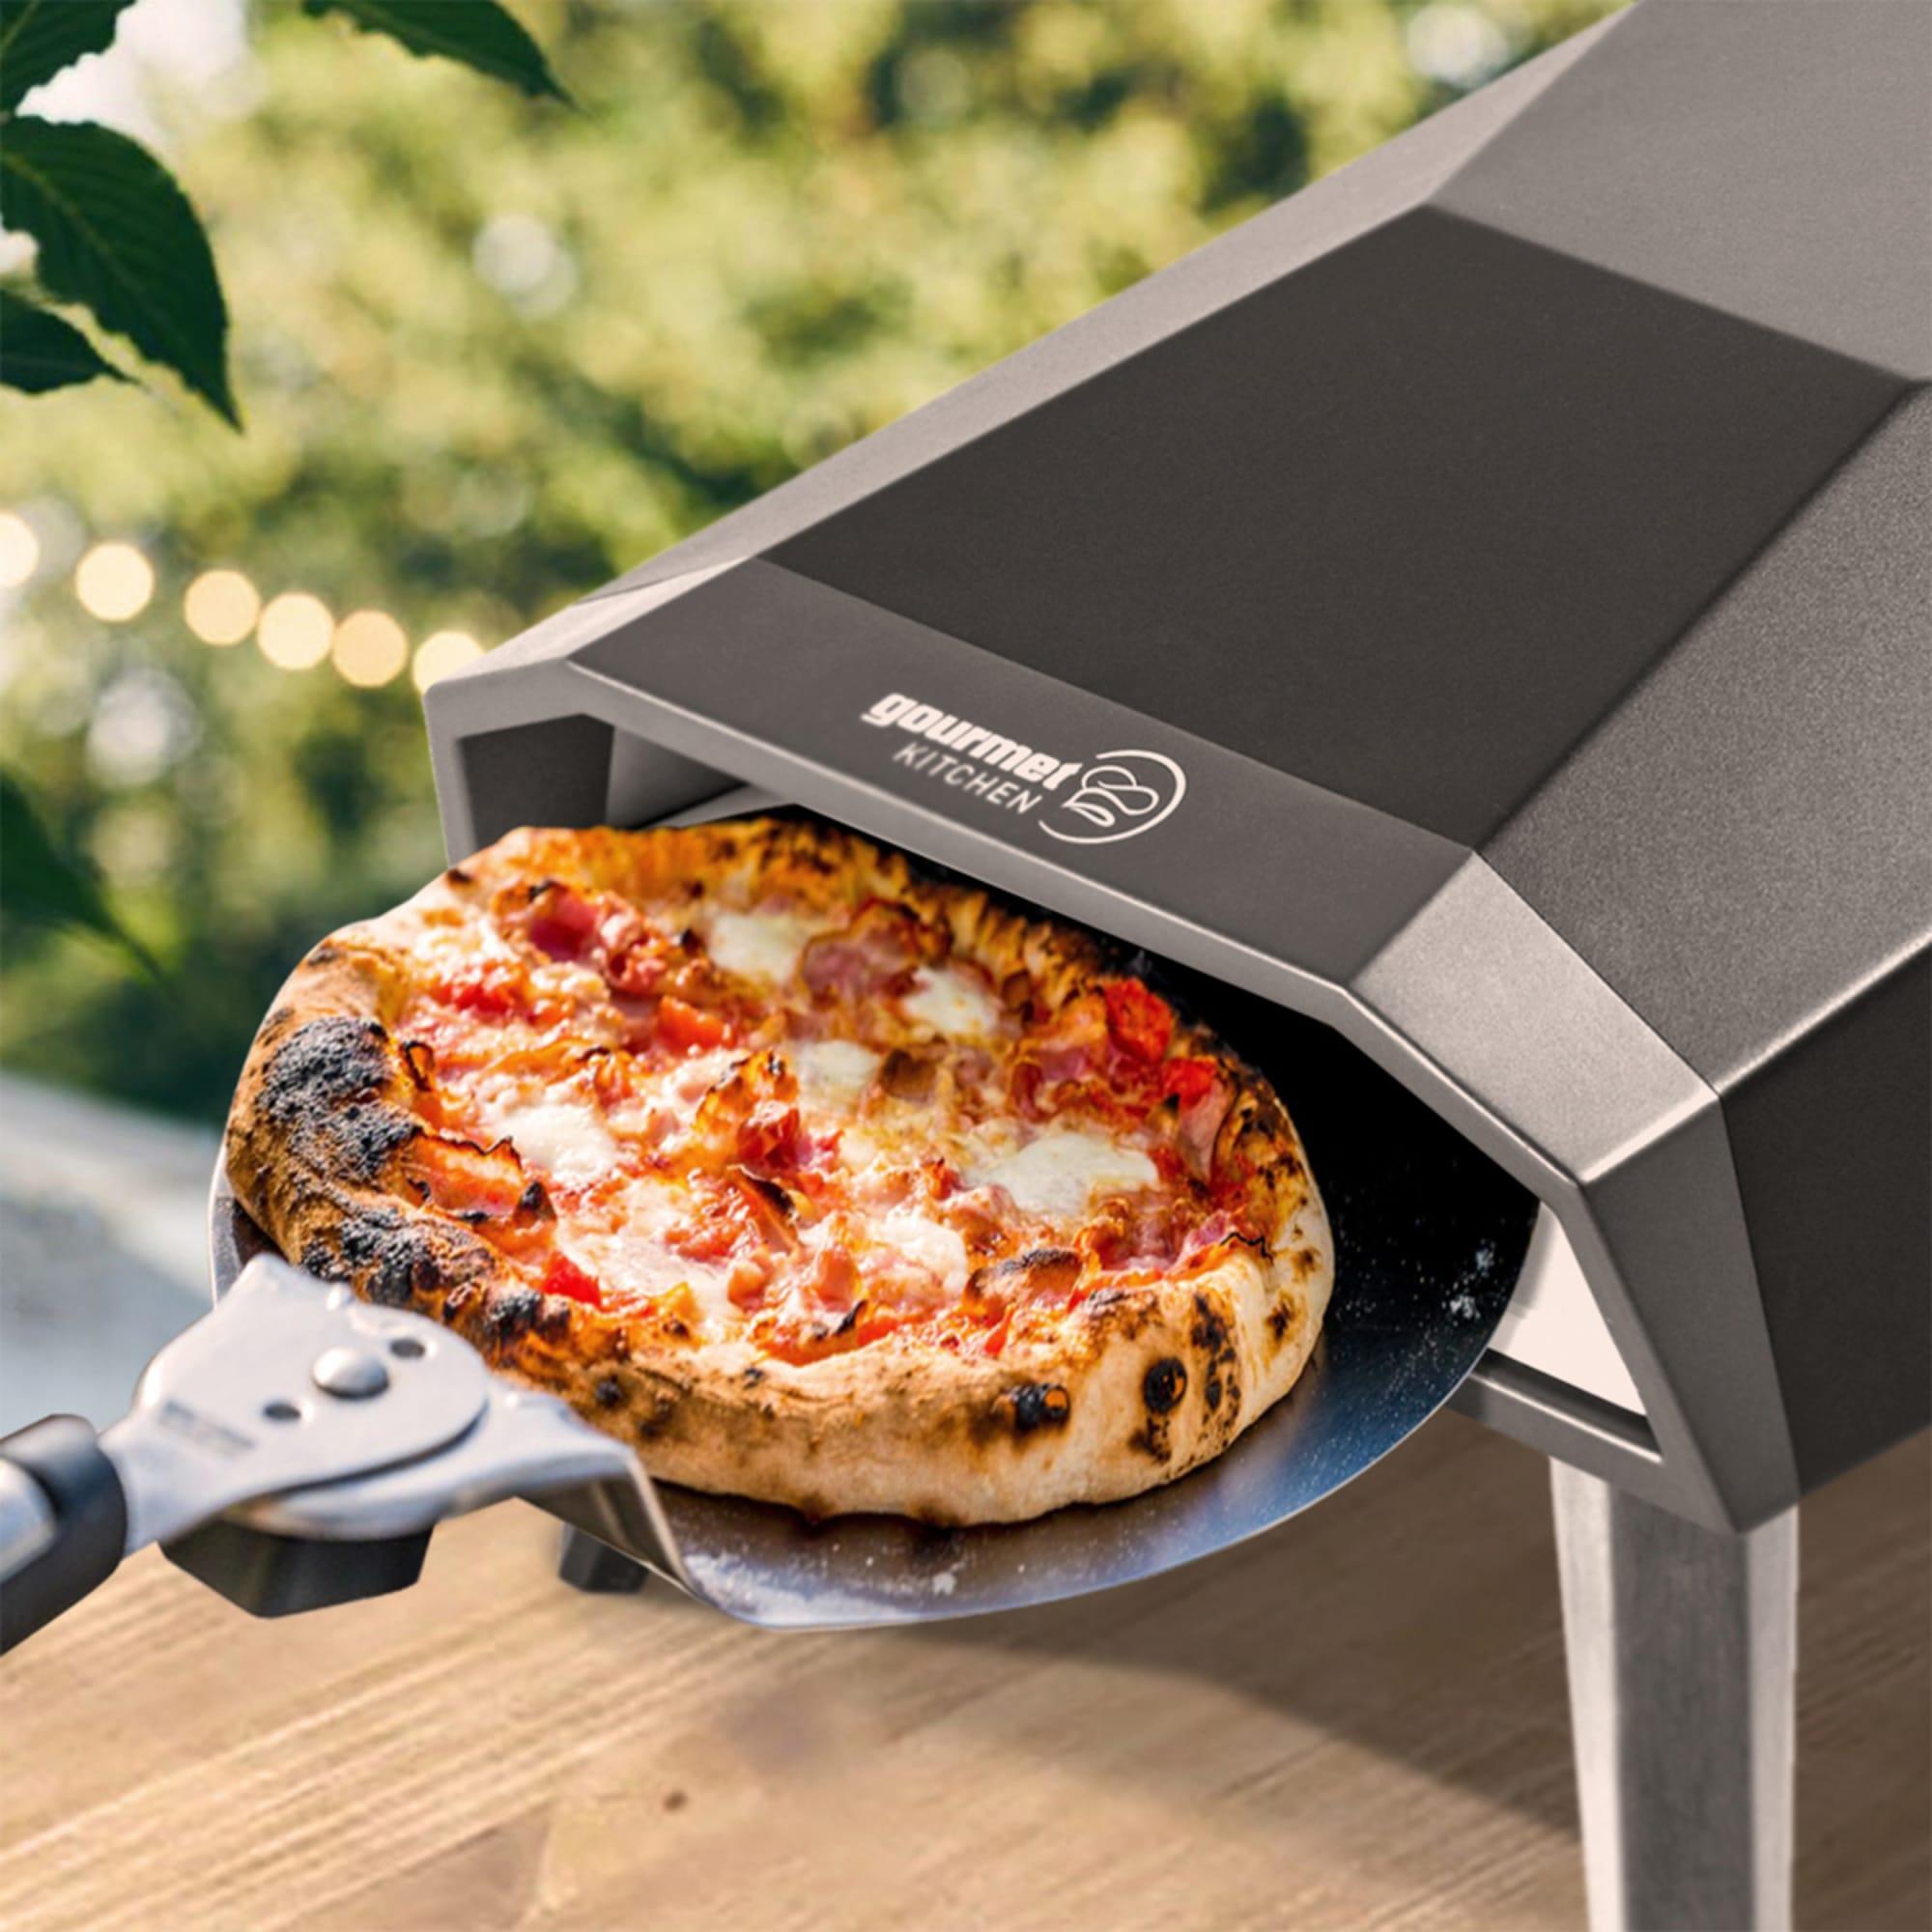 Gourmet Kitchen Portable Gas Pizza Oven with Pizza Stone and Carry Bag Image 3